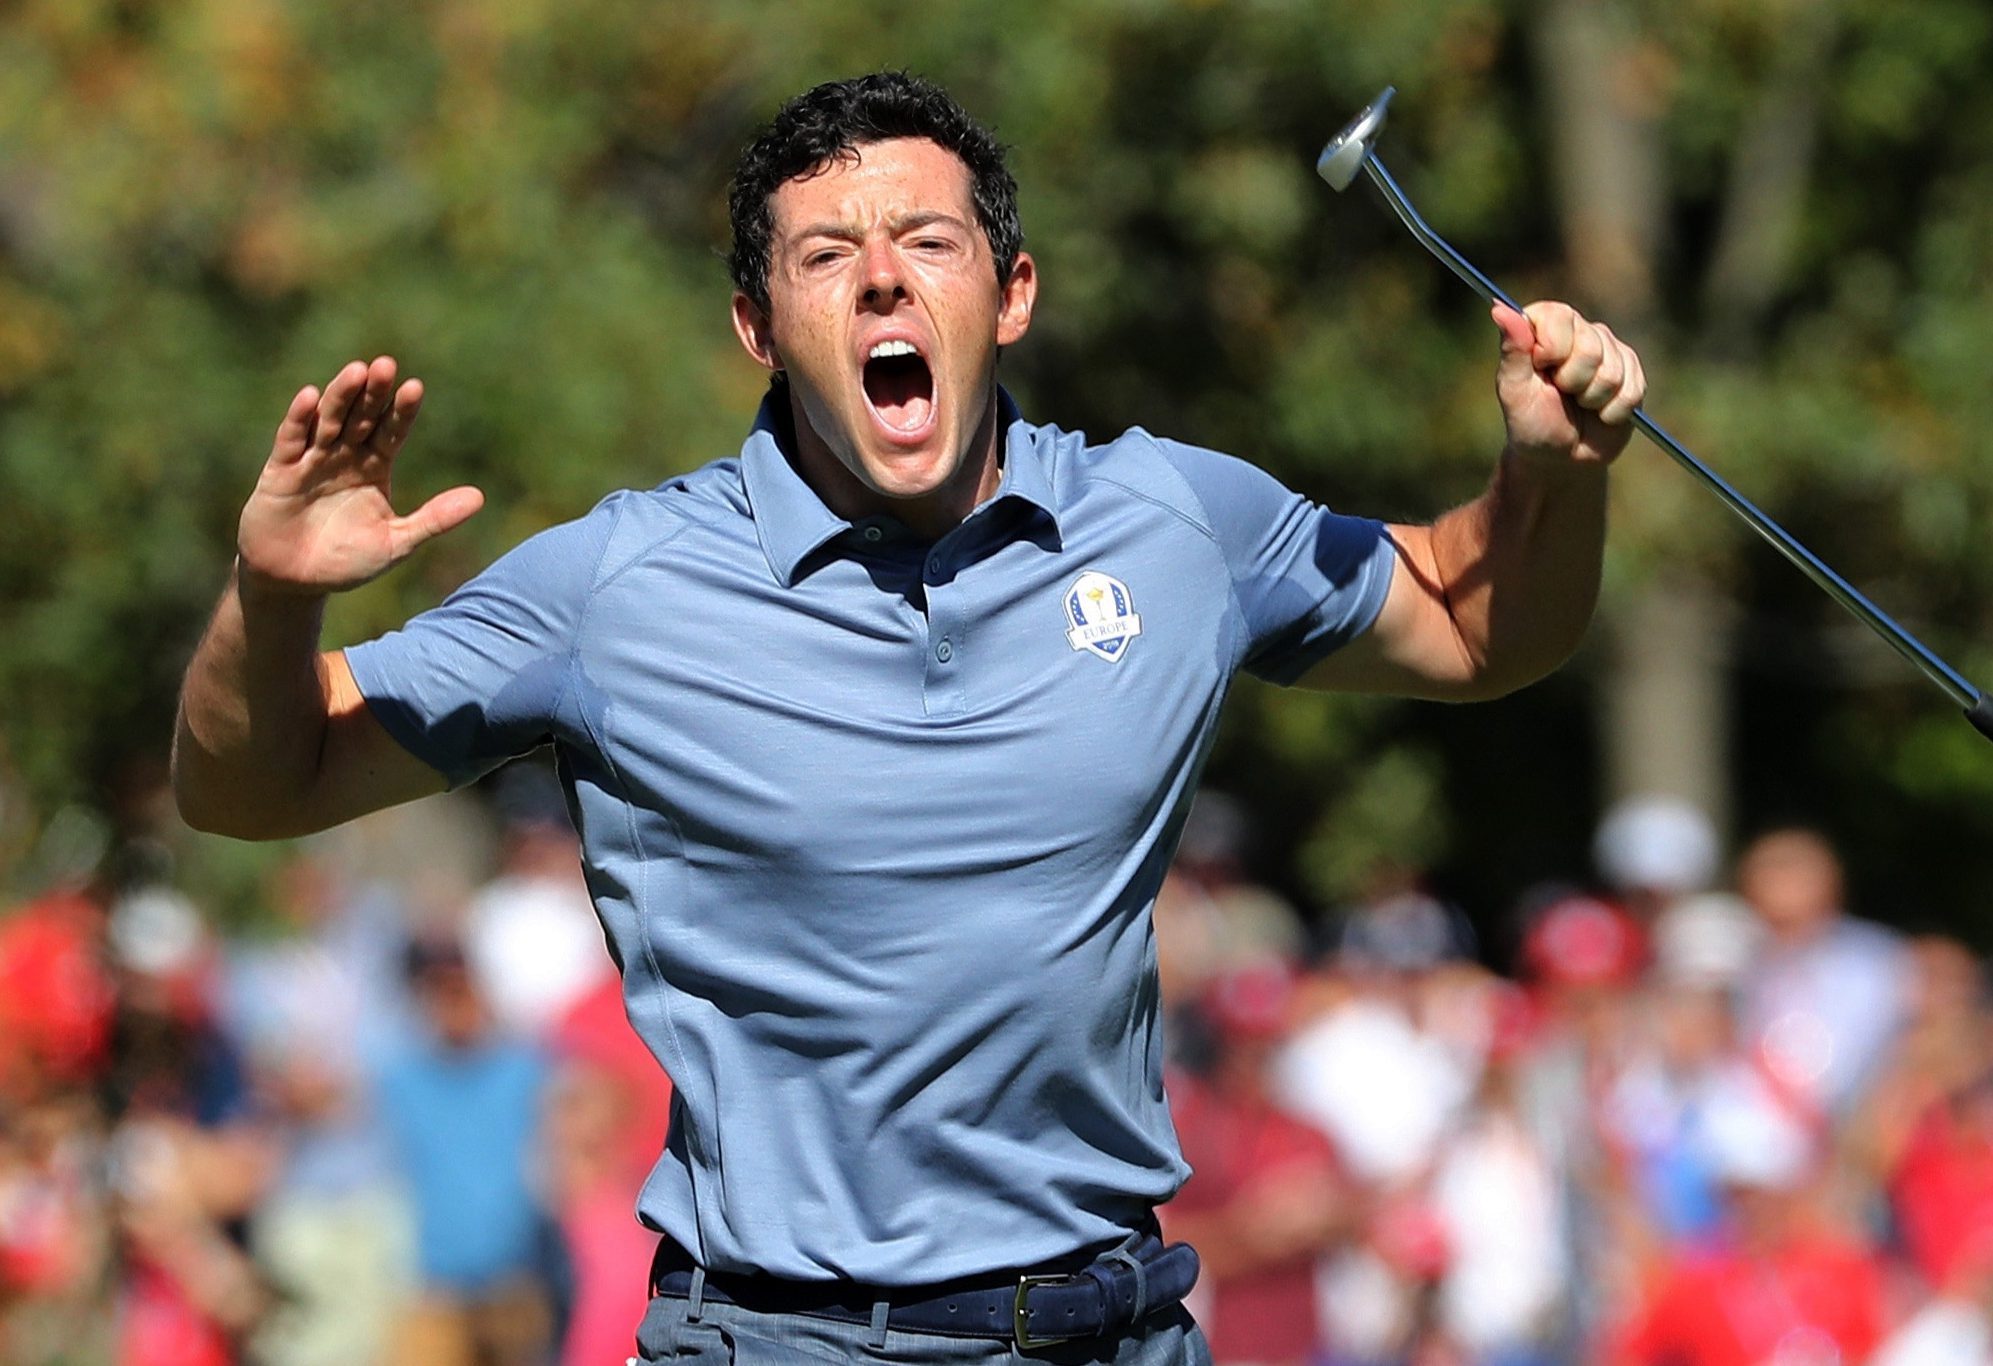 Rory McIlroy reveals exactly why the US struggles at the Ryder Cup